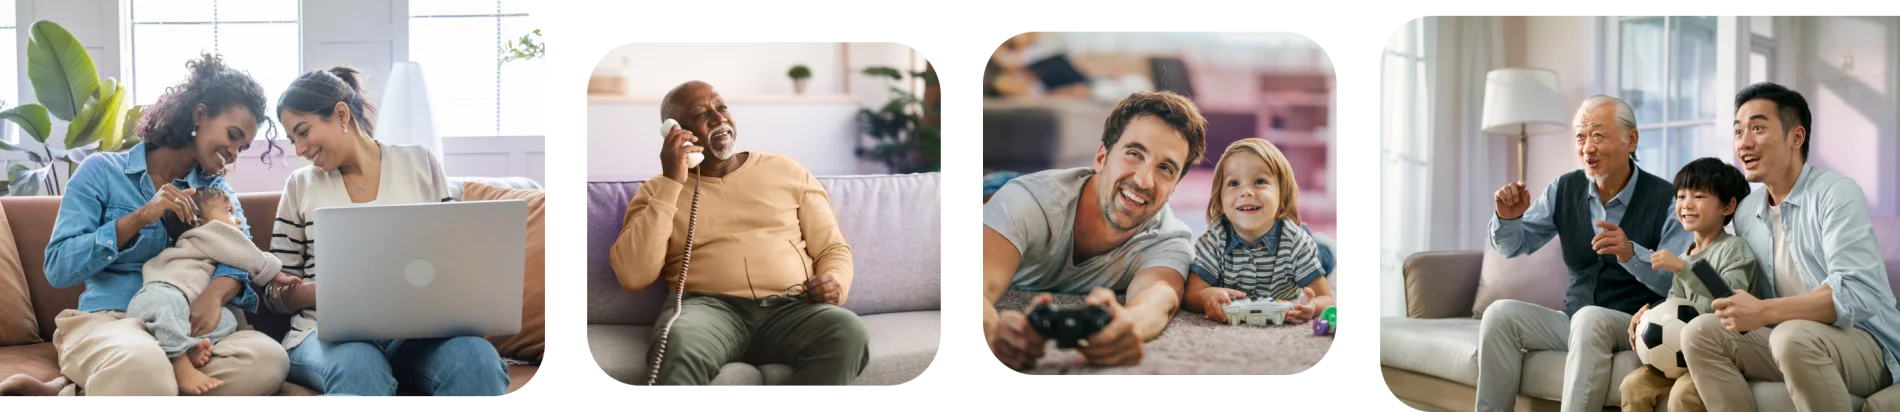 Image collage: A couple and a child viewing a laptop; a man speaking with a friend on a home phone; A father and son playing video games; a family streaming sports on Optik TV.